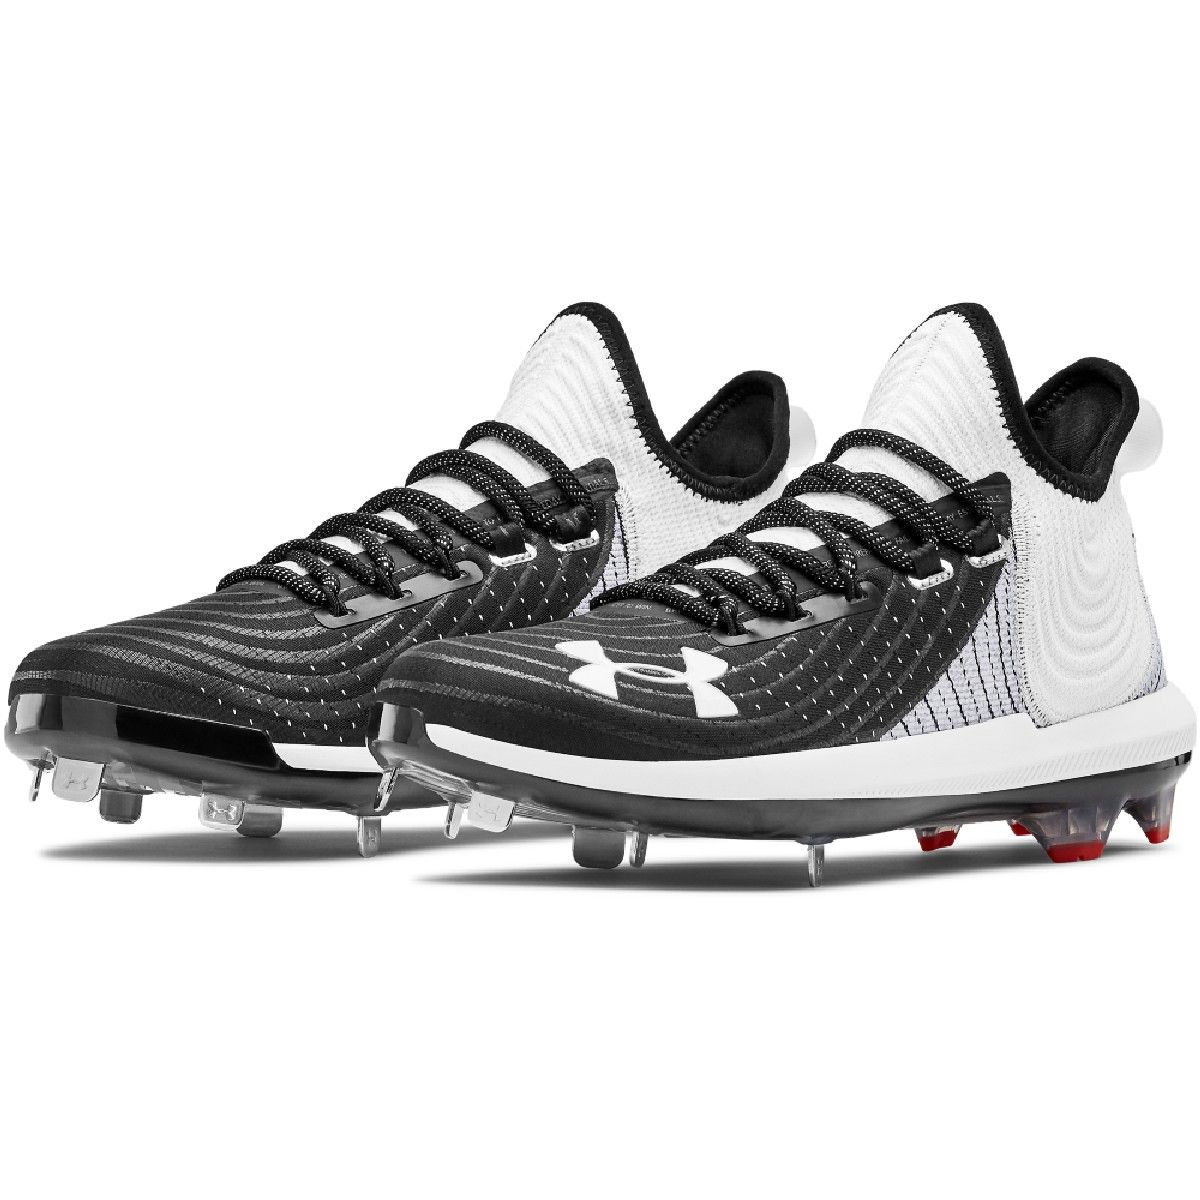 New Adult Men's 9.0 (W 10.0) Metal Under Armour Bryce Harper 5 Cleats